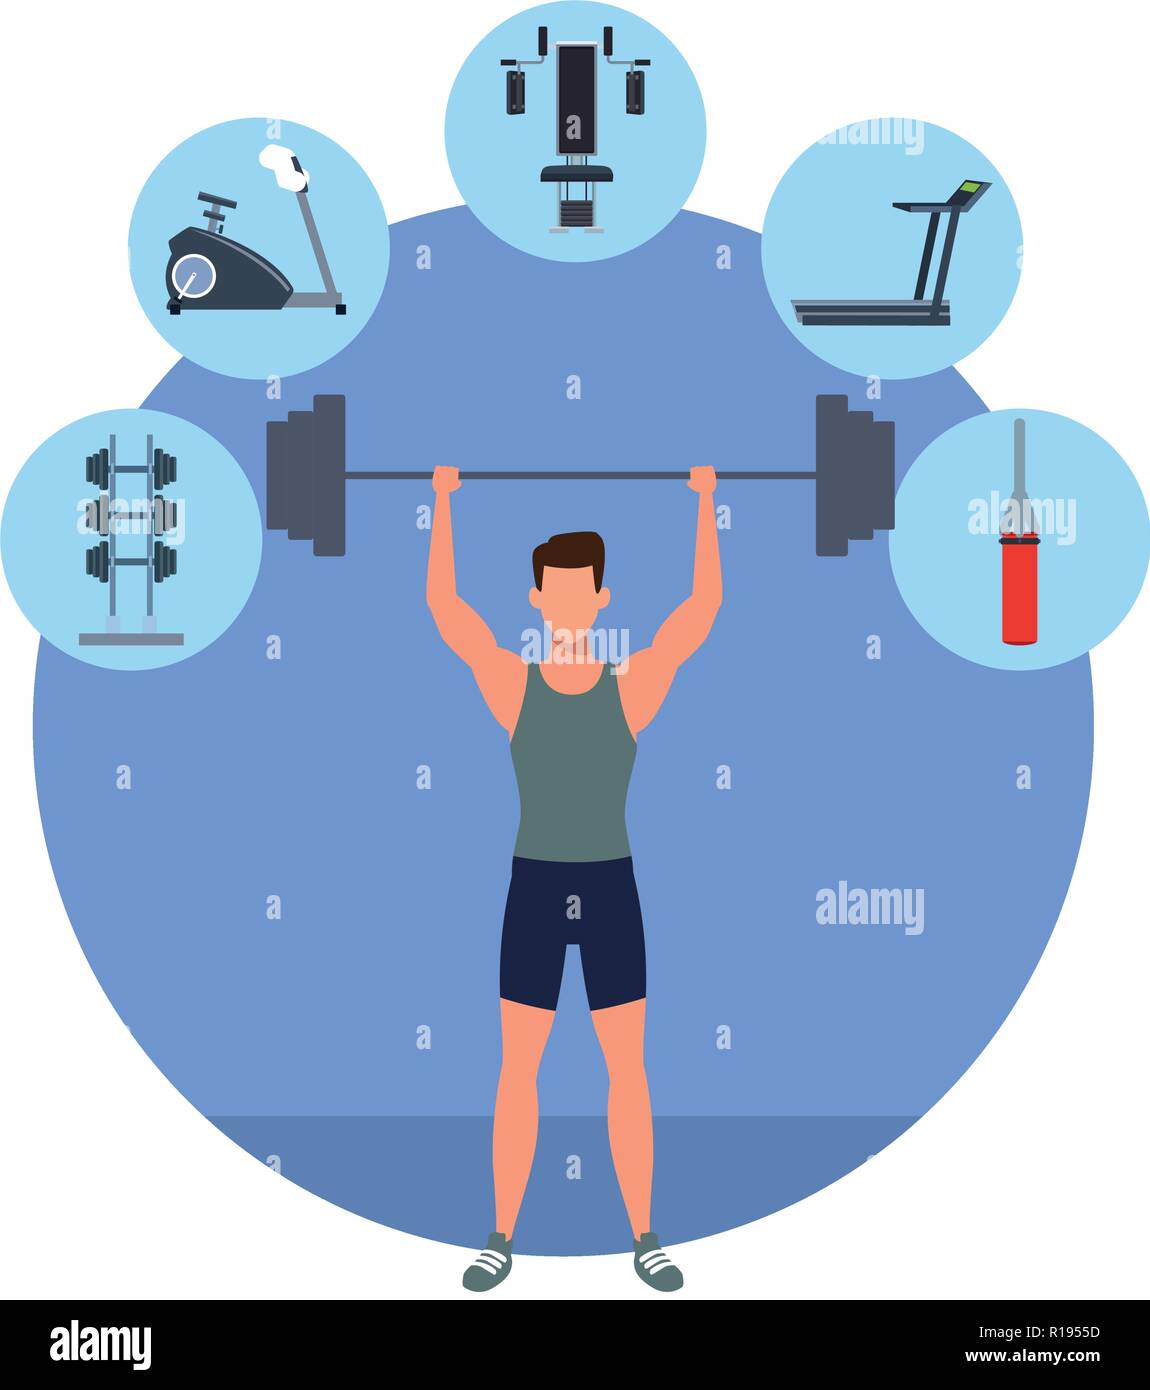 https://c8.alamy.com/comp/R1955D/fitness-man-training-with-dumbells-and-fitness-elements-blue-round-icon-cartoon-vector-illustration-graphic-design-R1955D.jpg